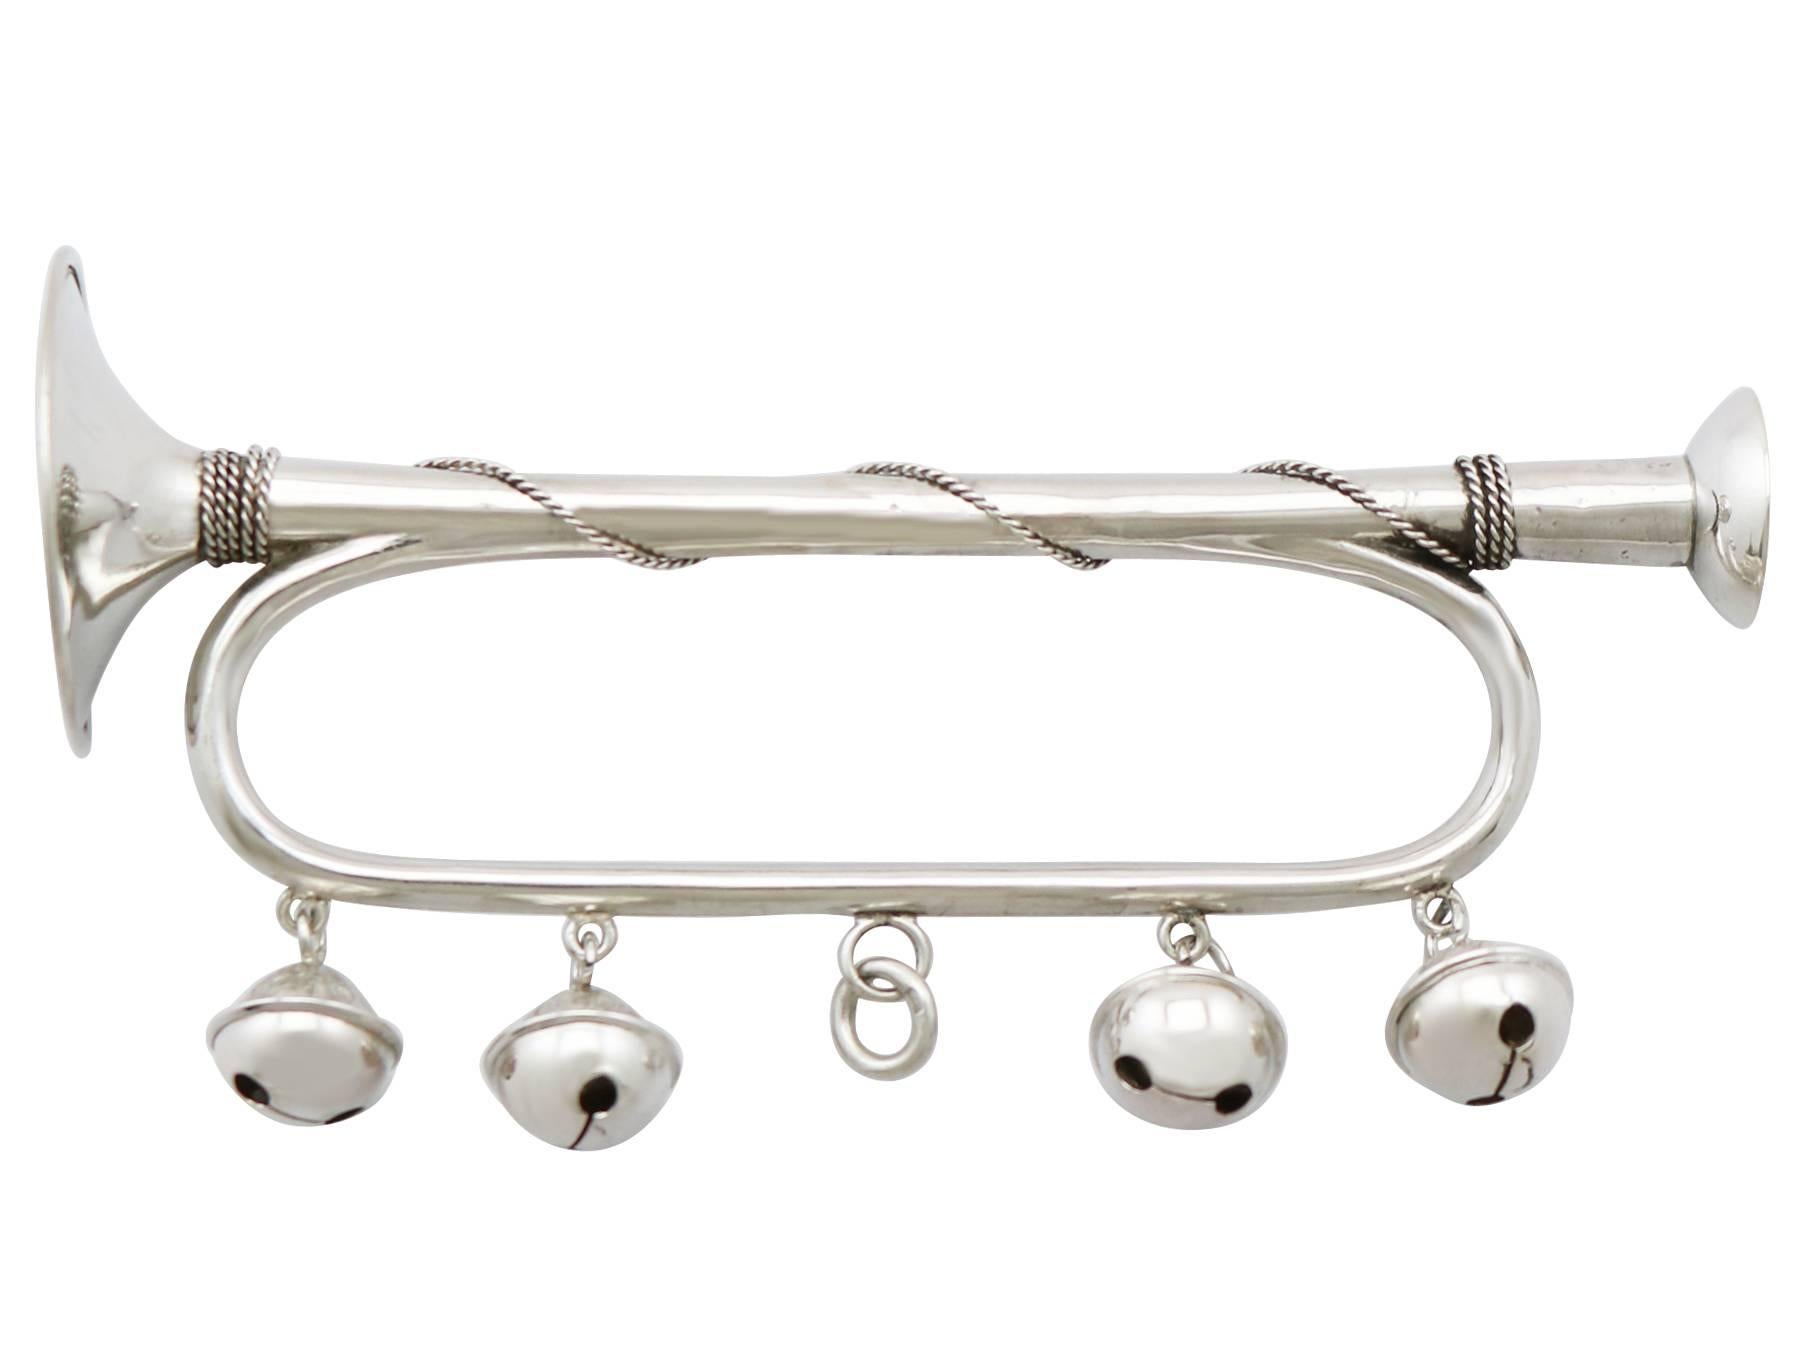 A fine and impressive antique Victorian sterling silver rattle modelled in the form of a trumpet; part of our diverse silverware collection.

This exceptional antique Victorian sterling silver baby rattle has been modelled in the form of a